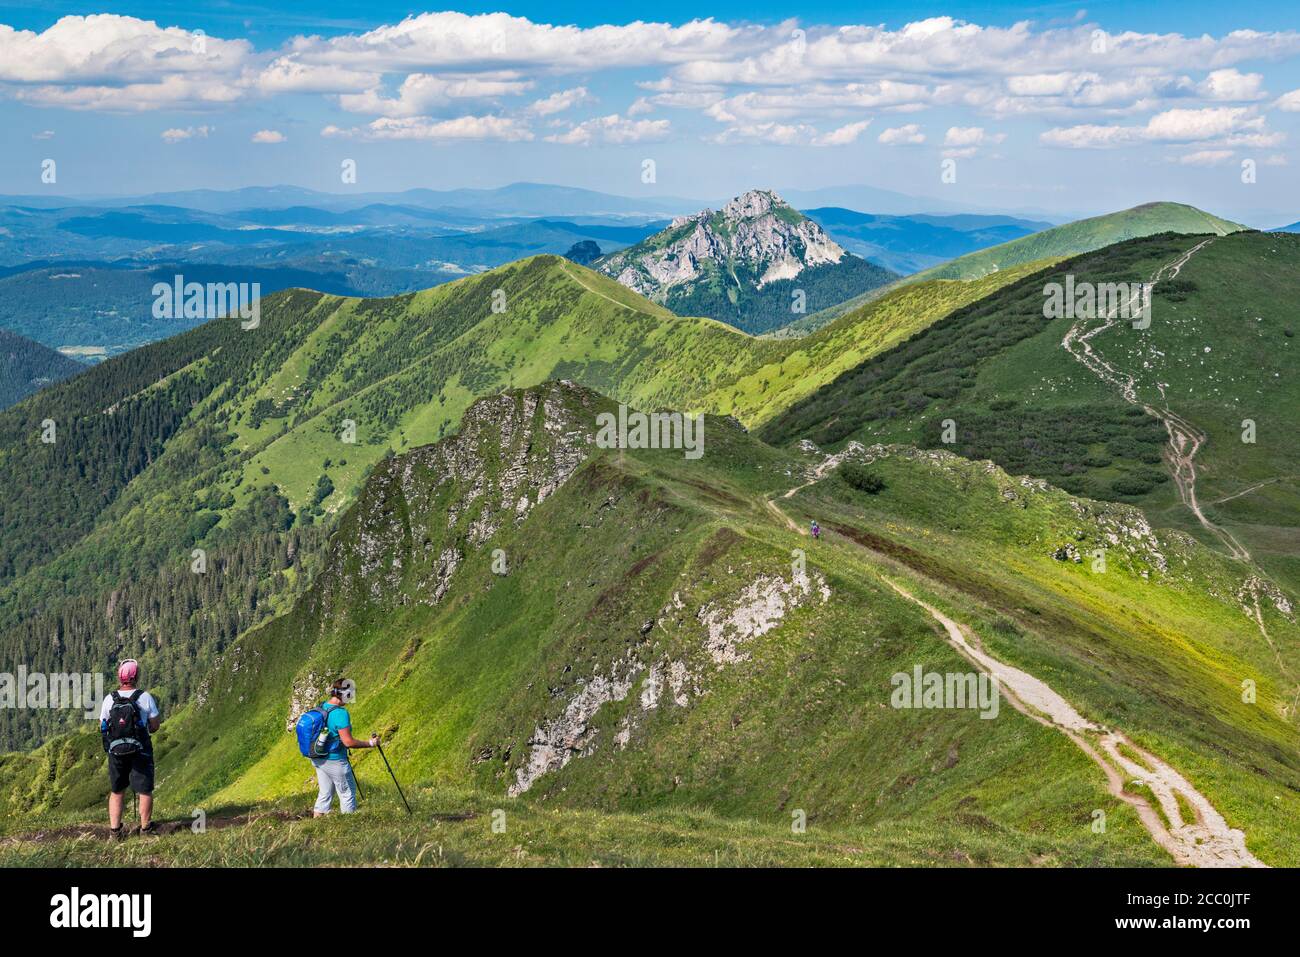 Velky Rozsutec mountain in far distance, Stoh massif on right, hikers, view NE from summit of Chleb, Mala Fatra National Park, Zilina Region, Slovakia Stock Photo